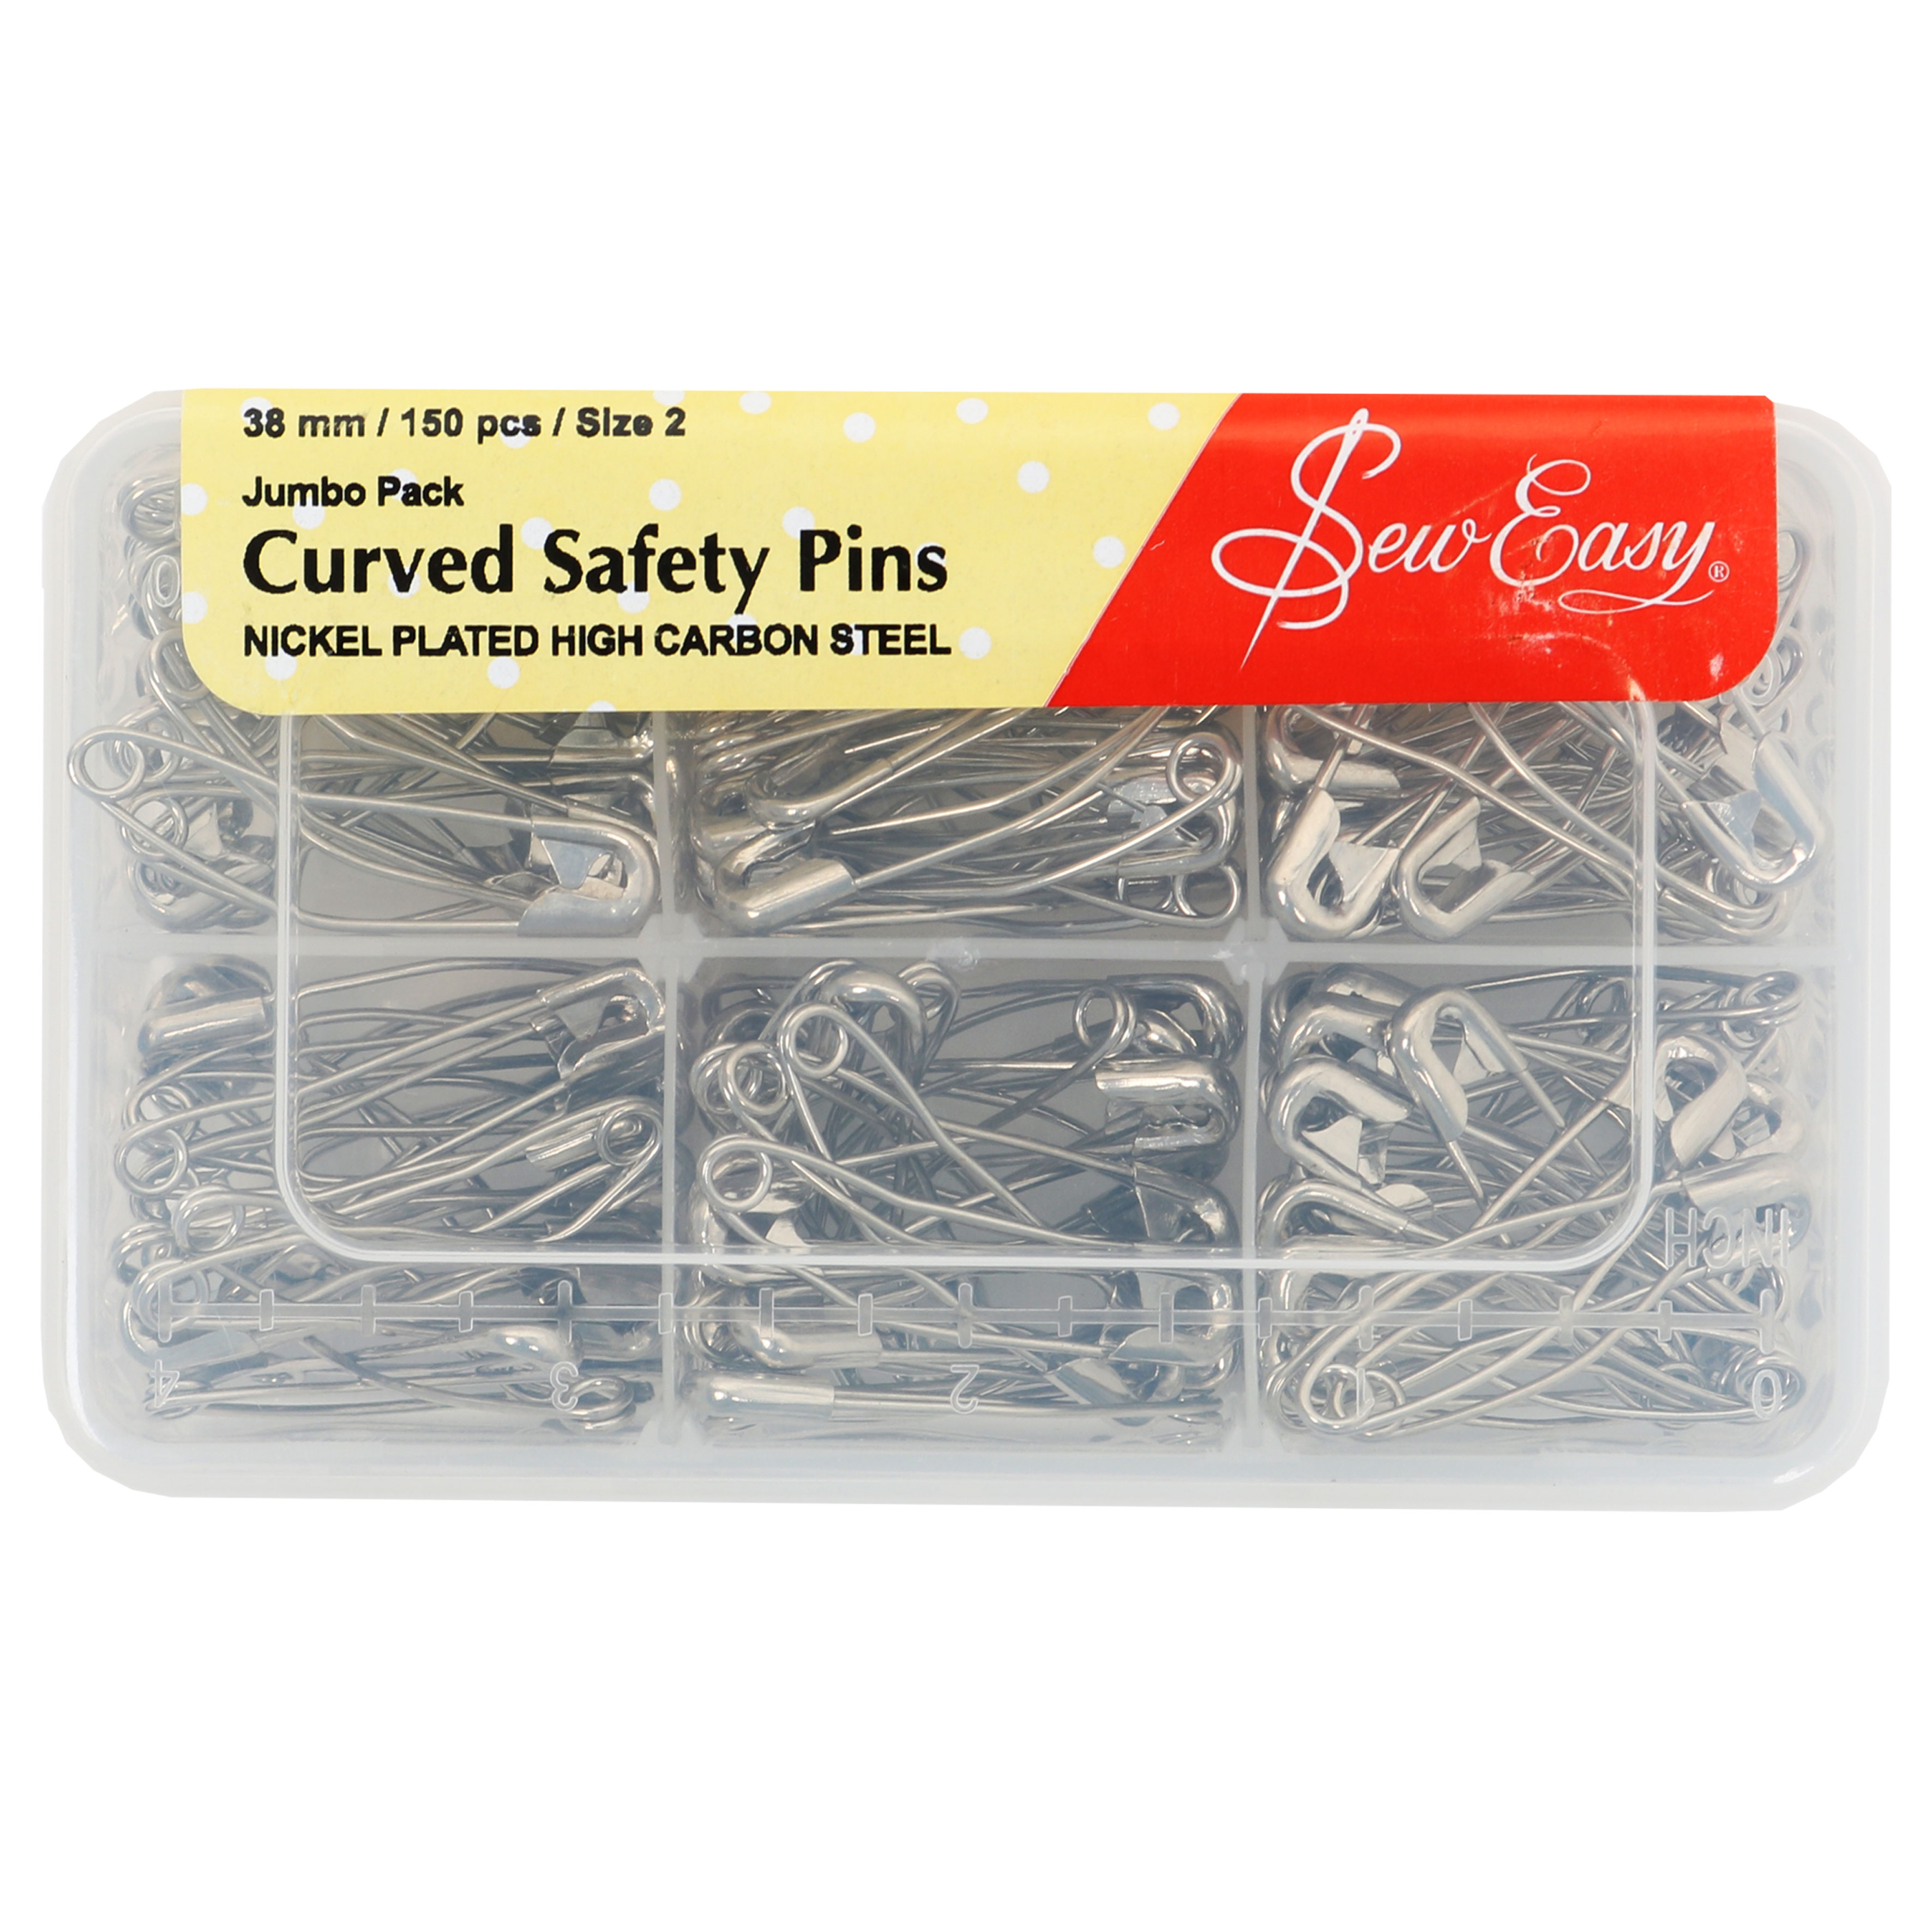 SewEasy - Curved Safety Pins - 38mm 150pcs Size 2